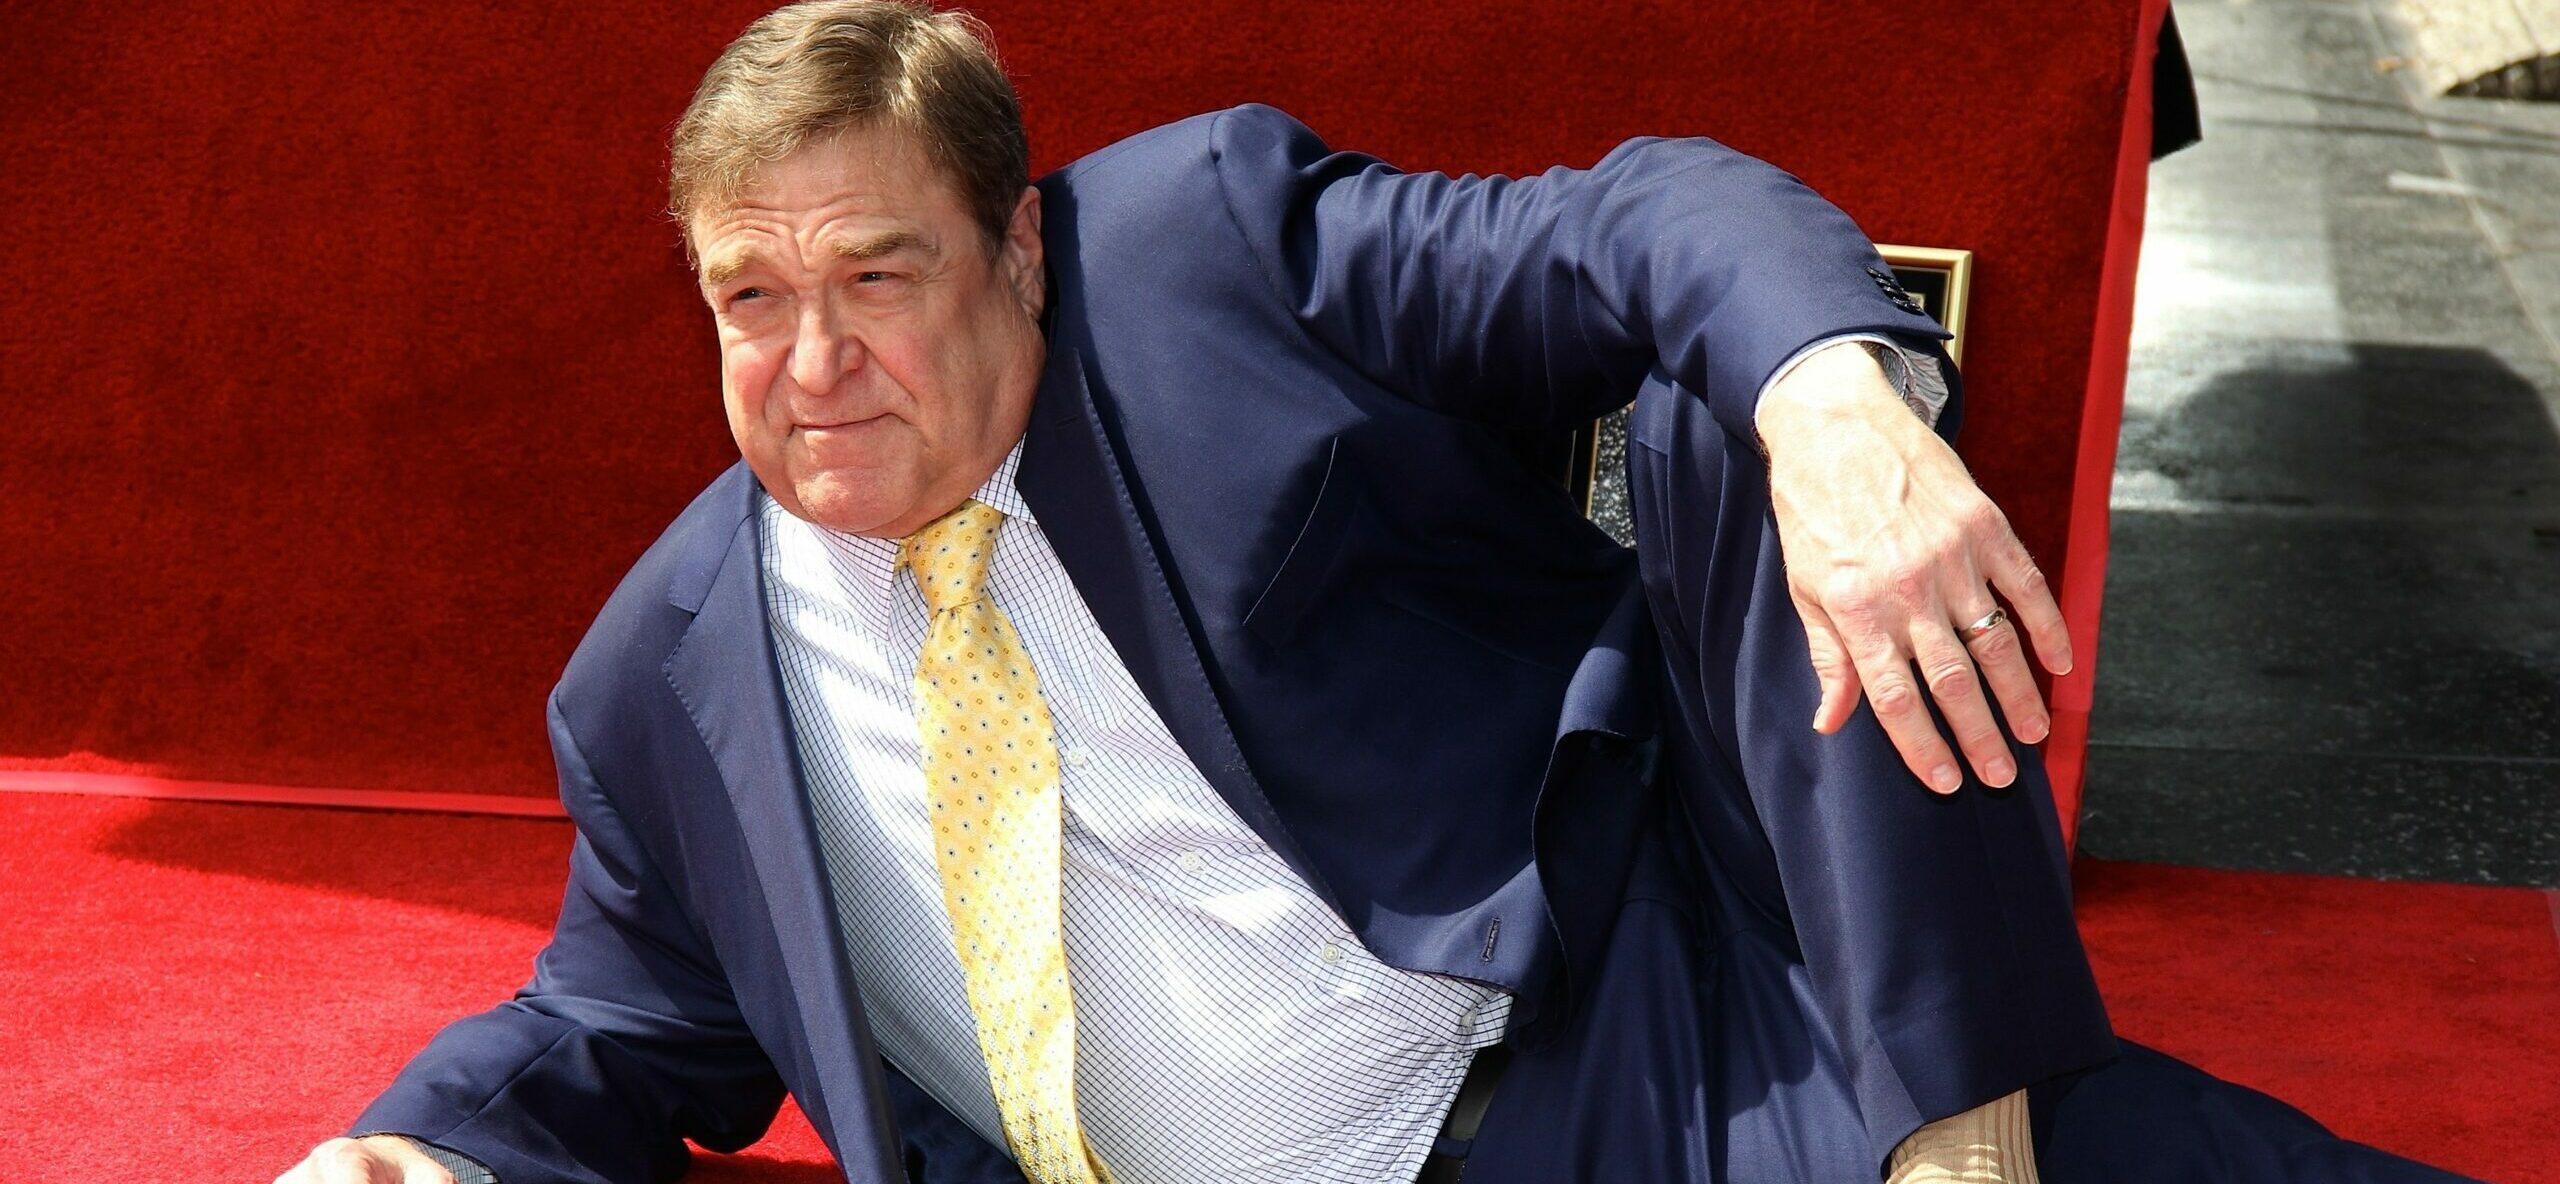 John Goodman Flaunts His 200-POUND Weight Loss On The Red Carpet